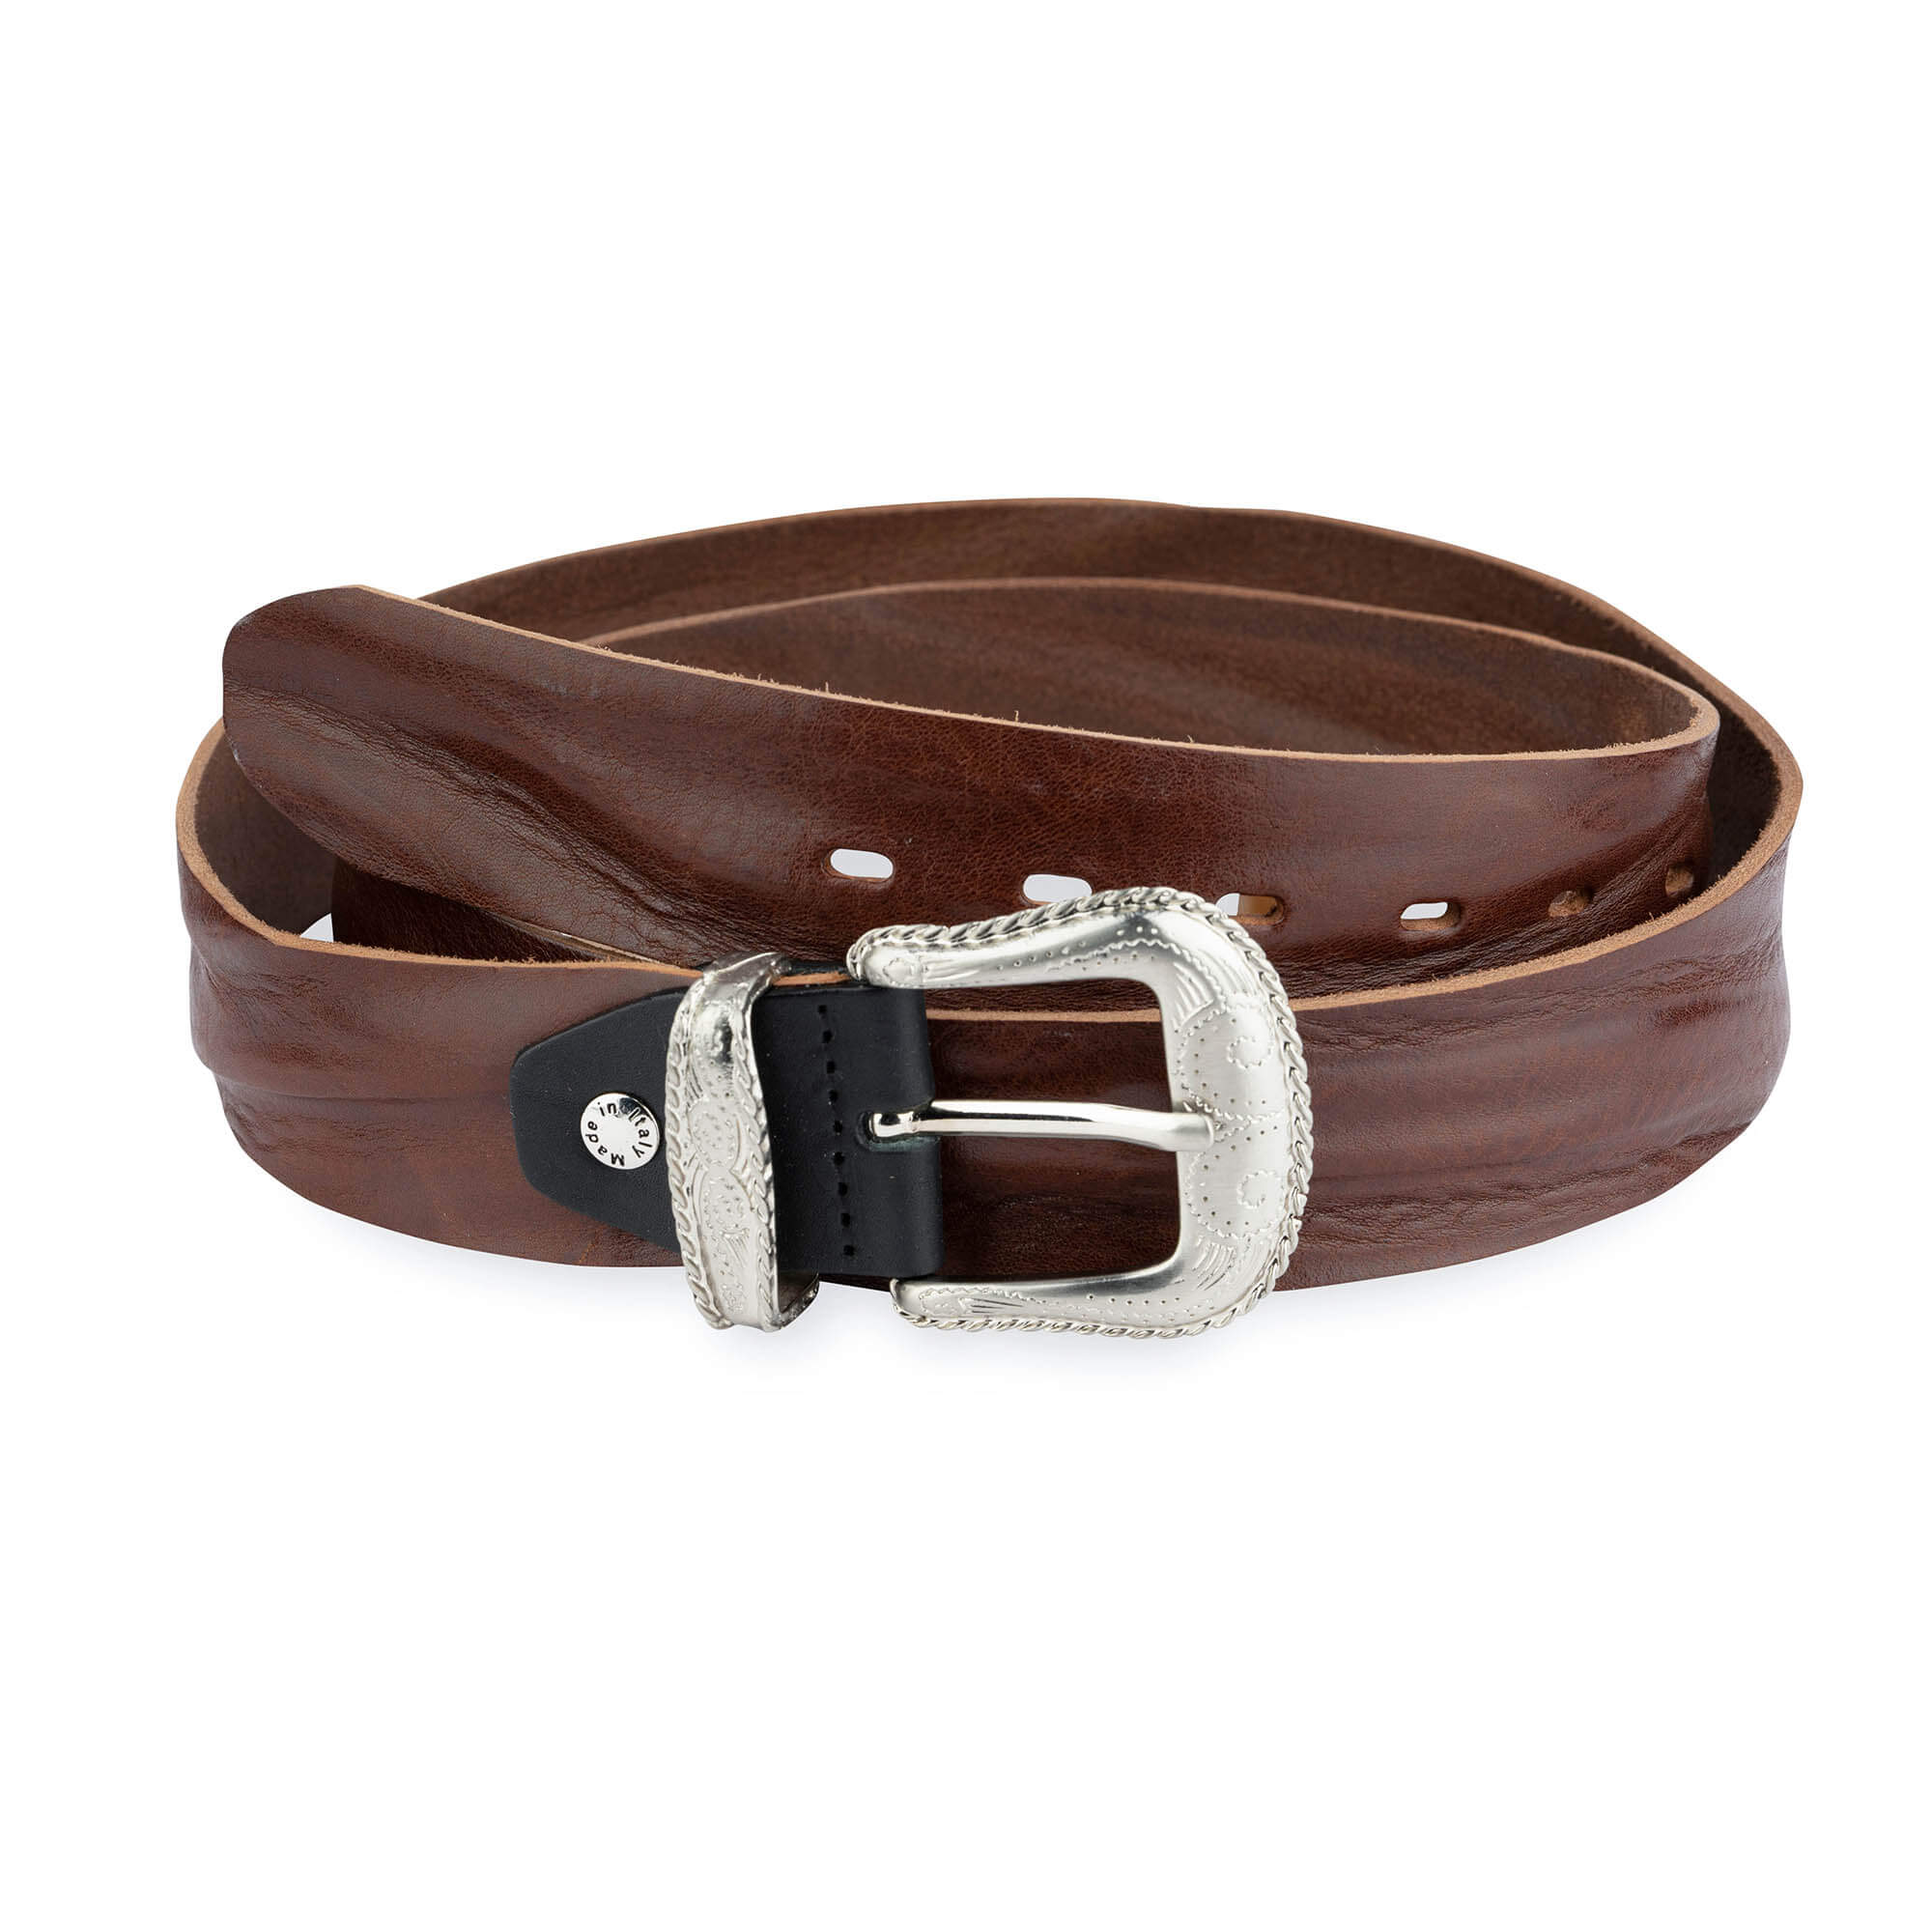 Buy Mens Big And Tall Western Belt | Brown Full Grain Leather | Capo